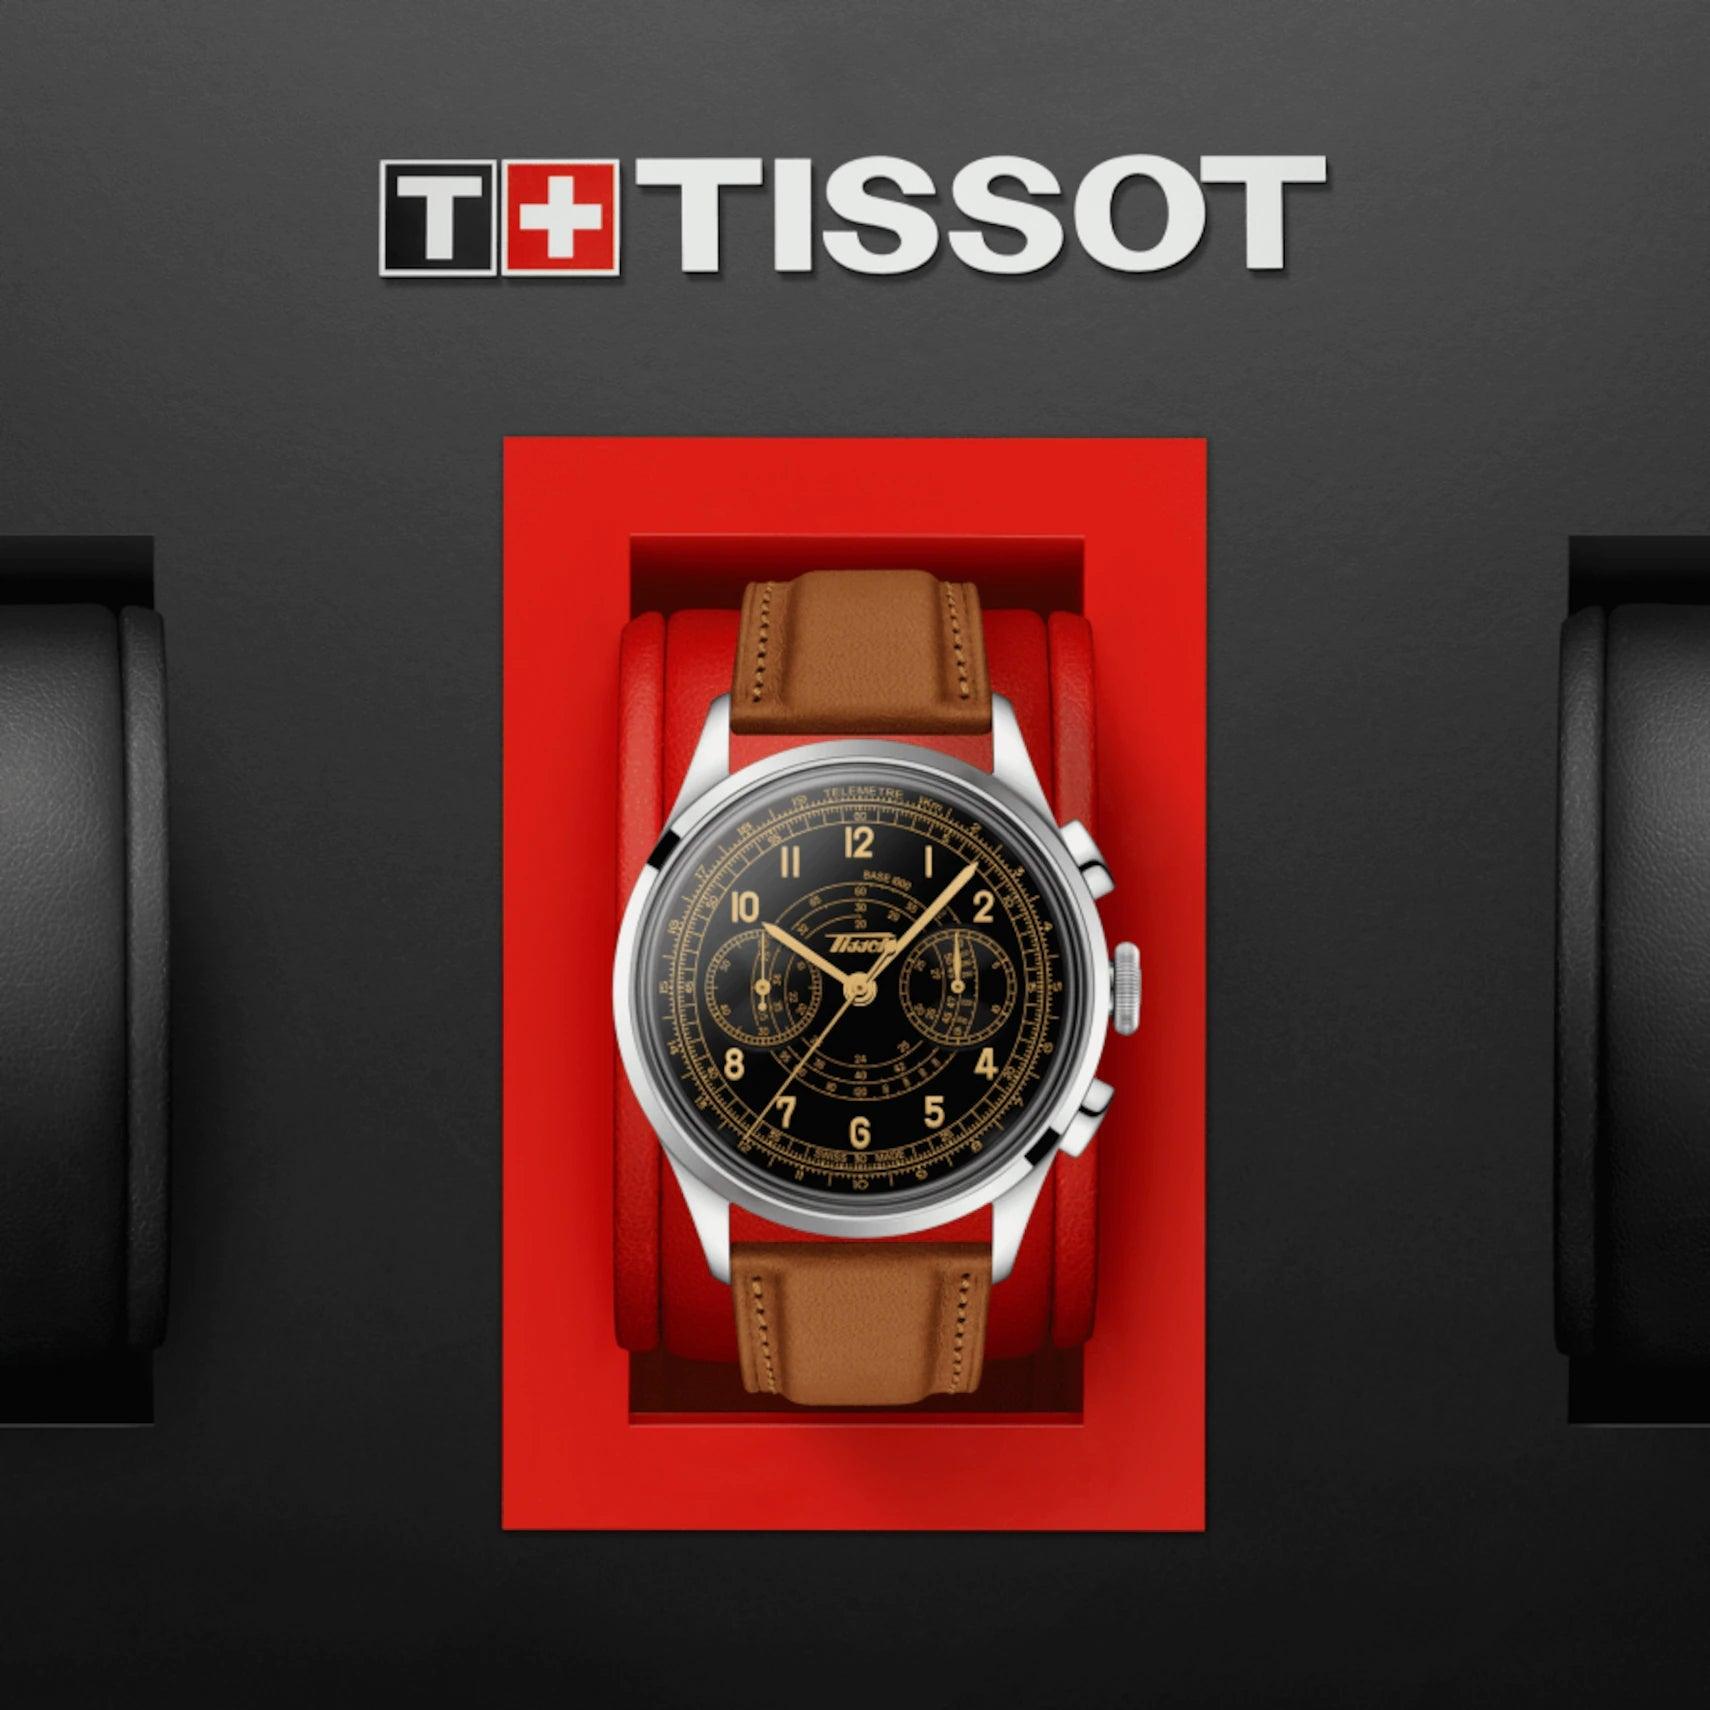 Tissot watches TISSOT TELEMETER 1938 Brown Leather Band Swiss Made Watch